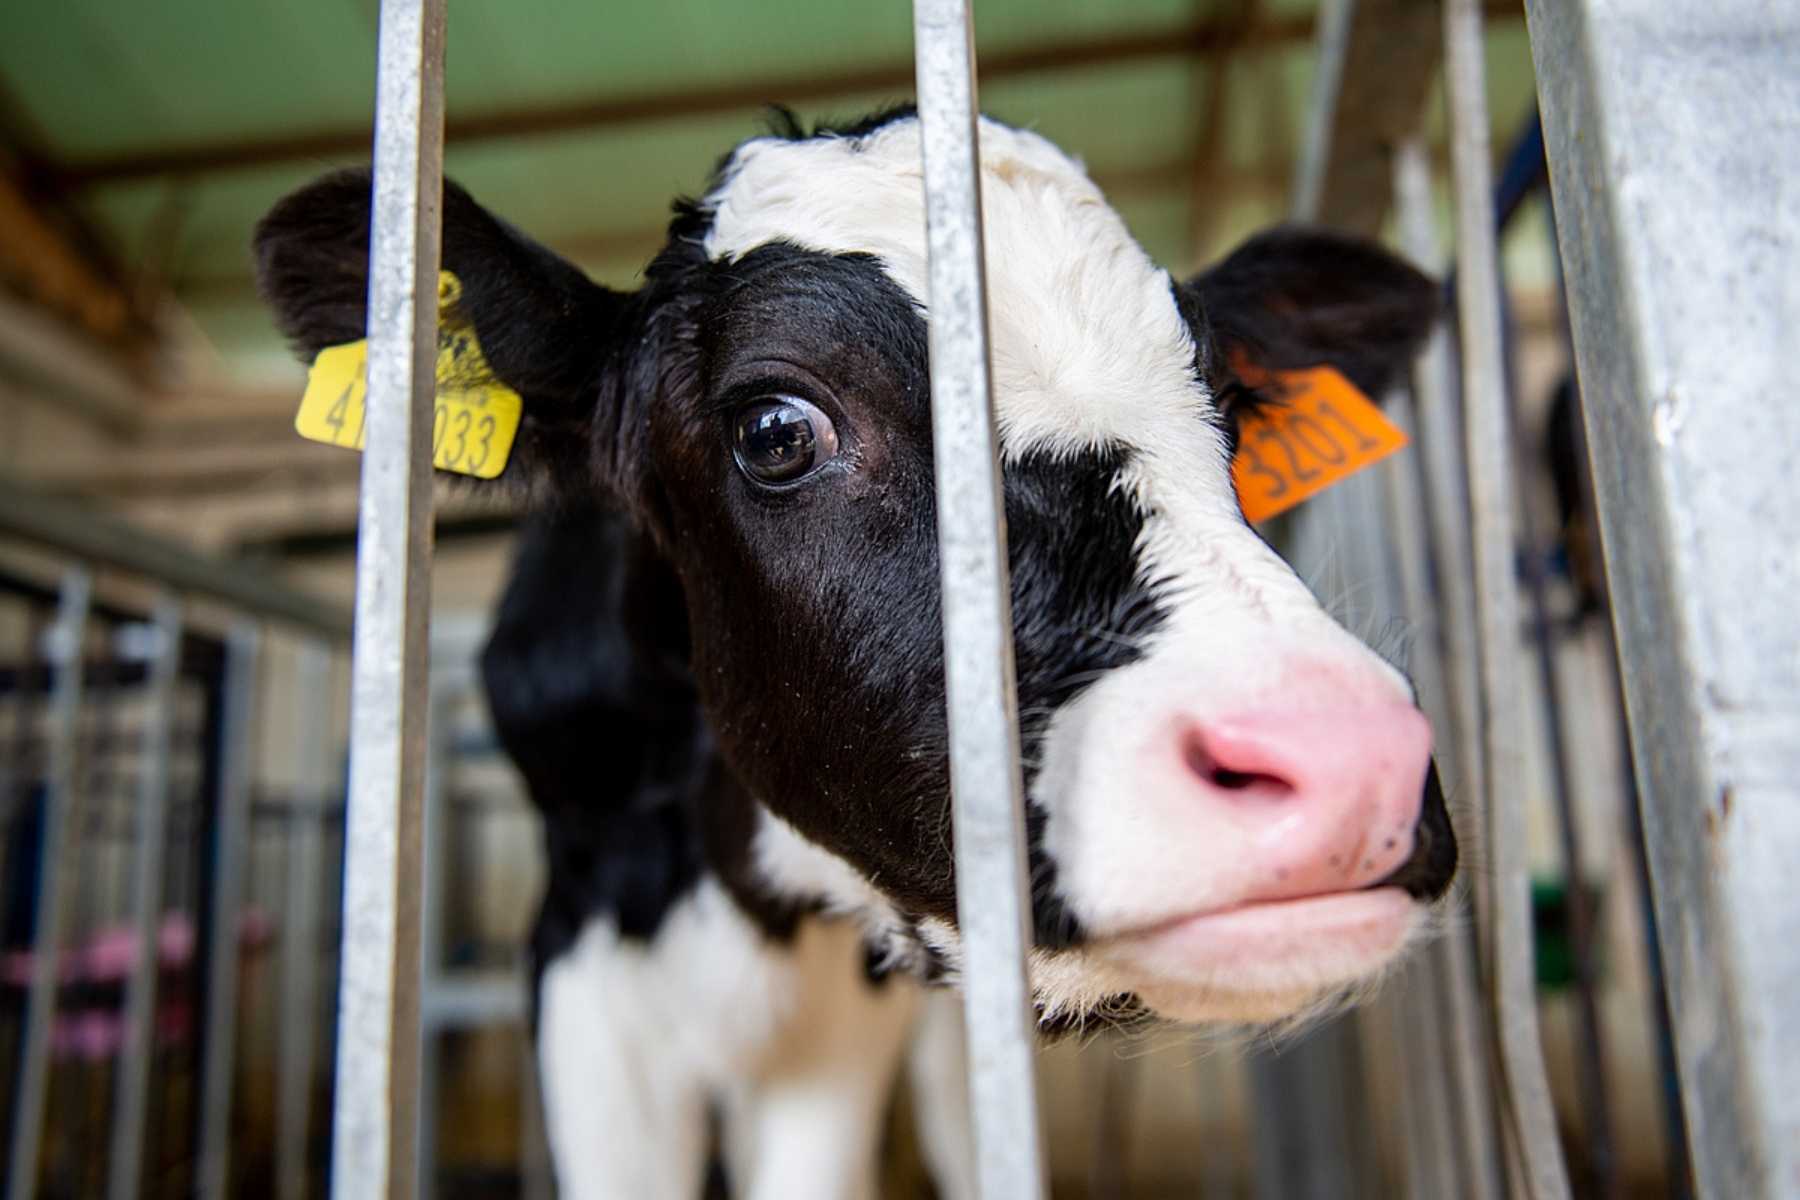 What Is Veal Meat, Where Does It Come From & Why Is It Cruel? - GenV